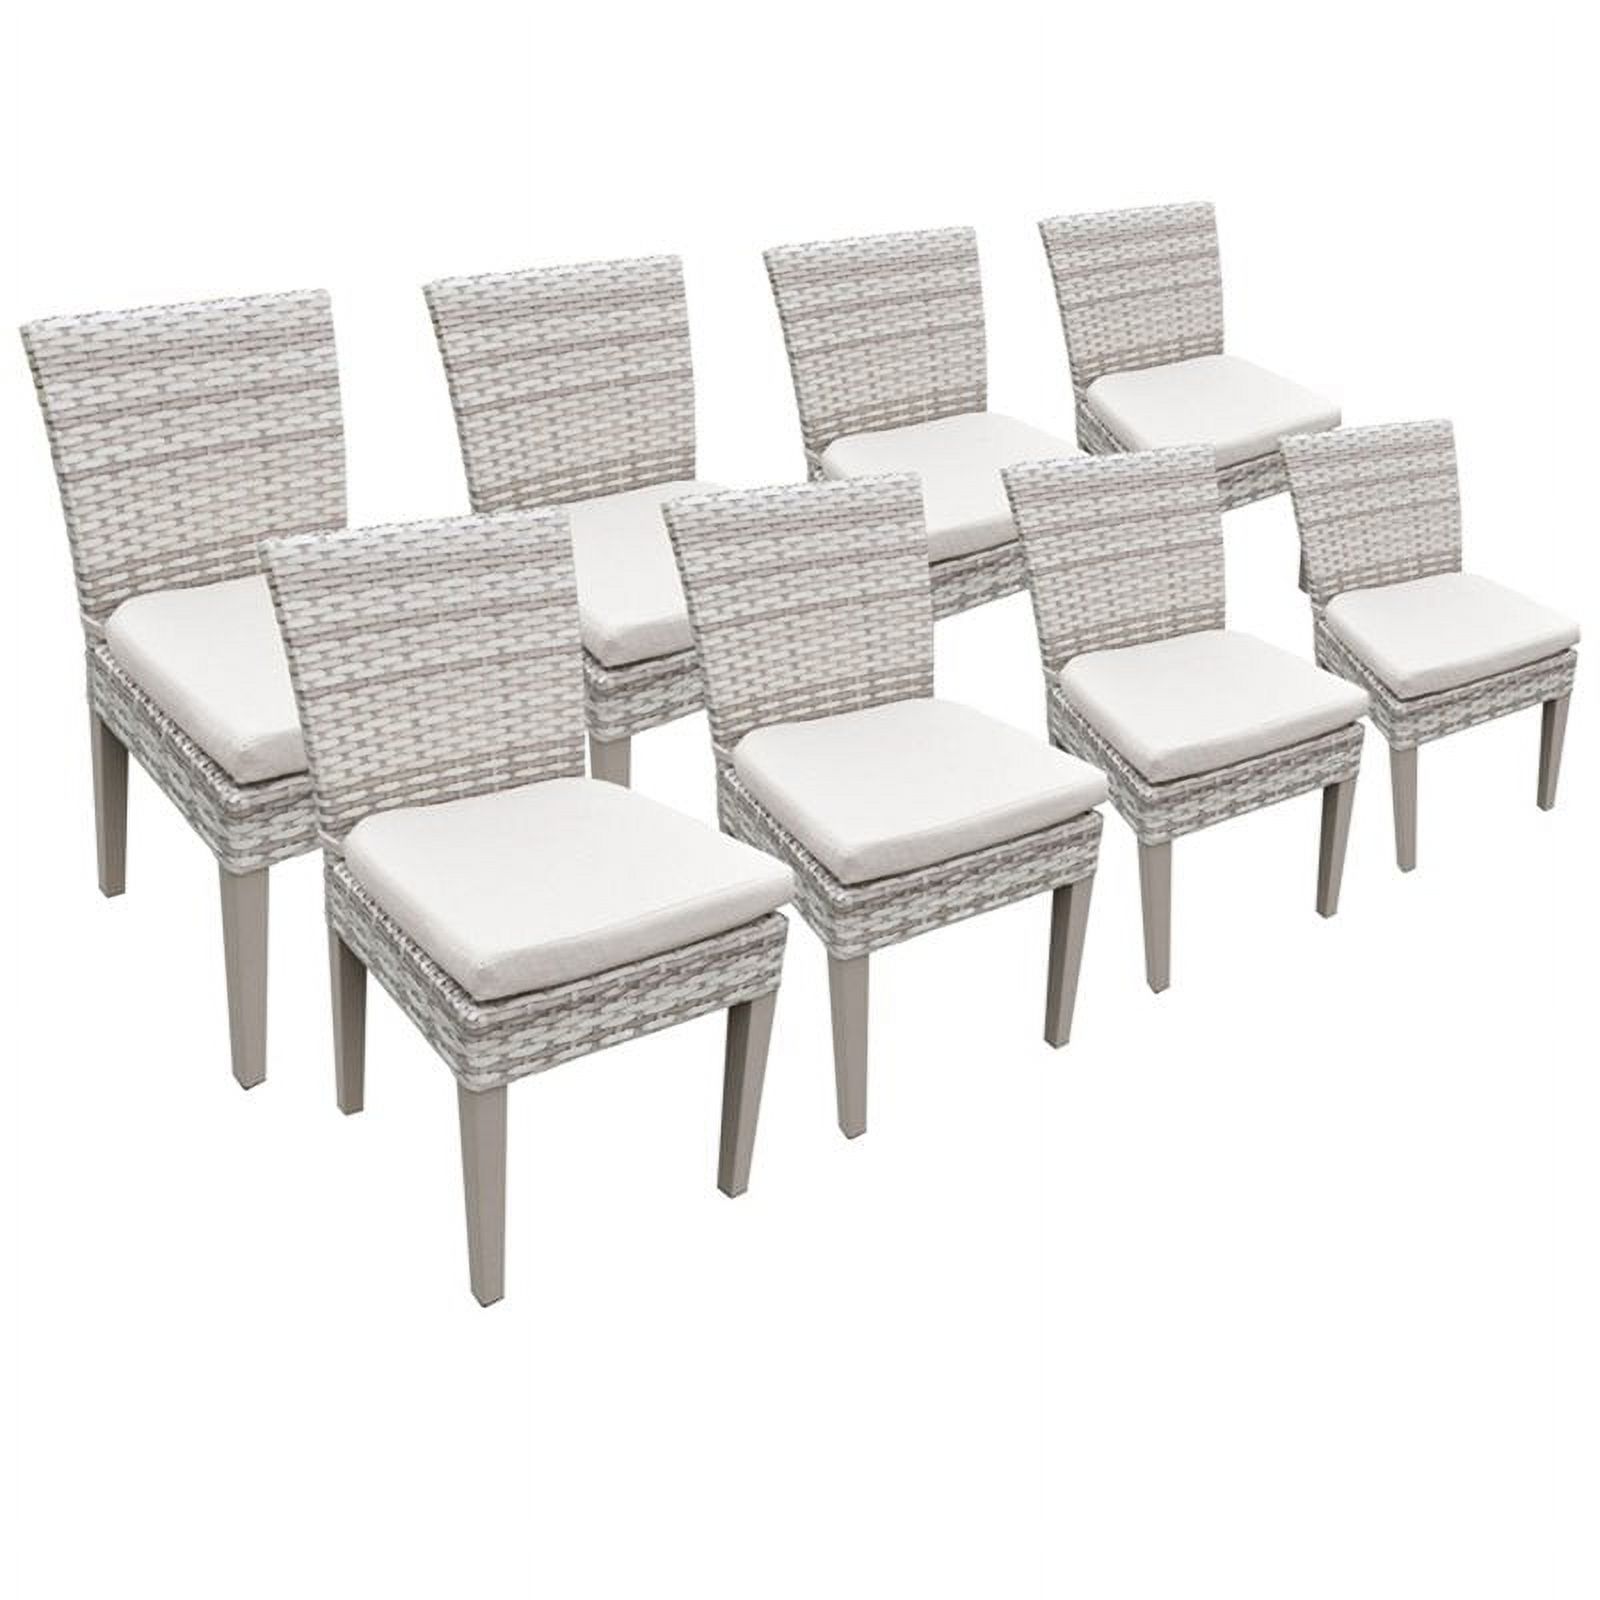 8 Fairmont Armless Dining Chairs-Color:Beige - image 1 of 1